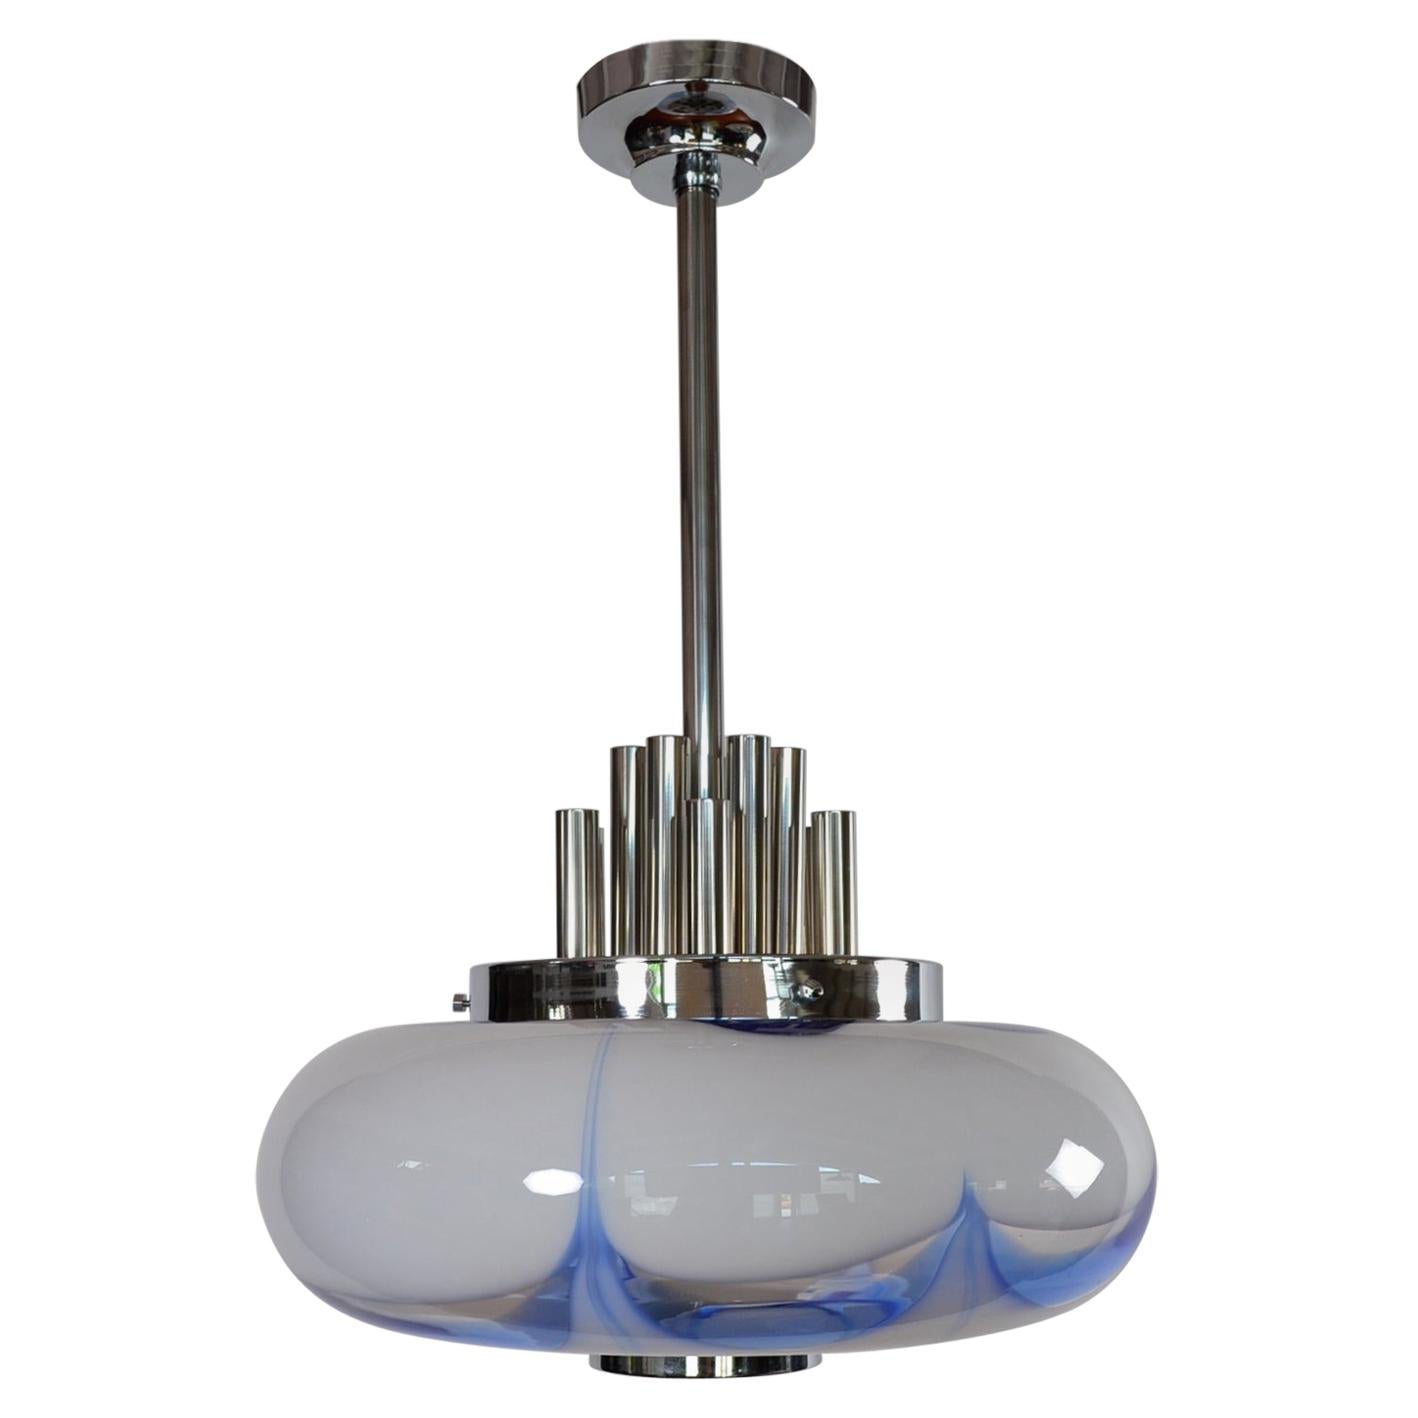 Italian Midcentury Murano Glass and Chrome Extra Large Ceiling Pendant, 1970s